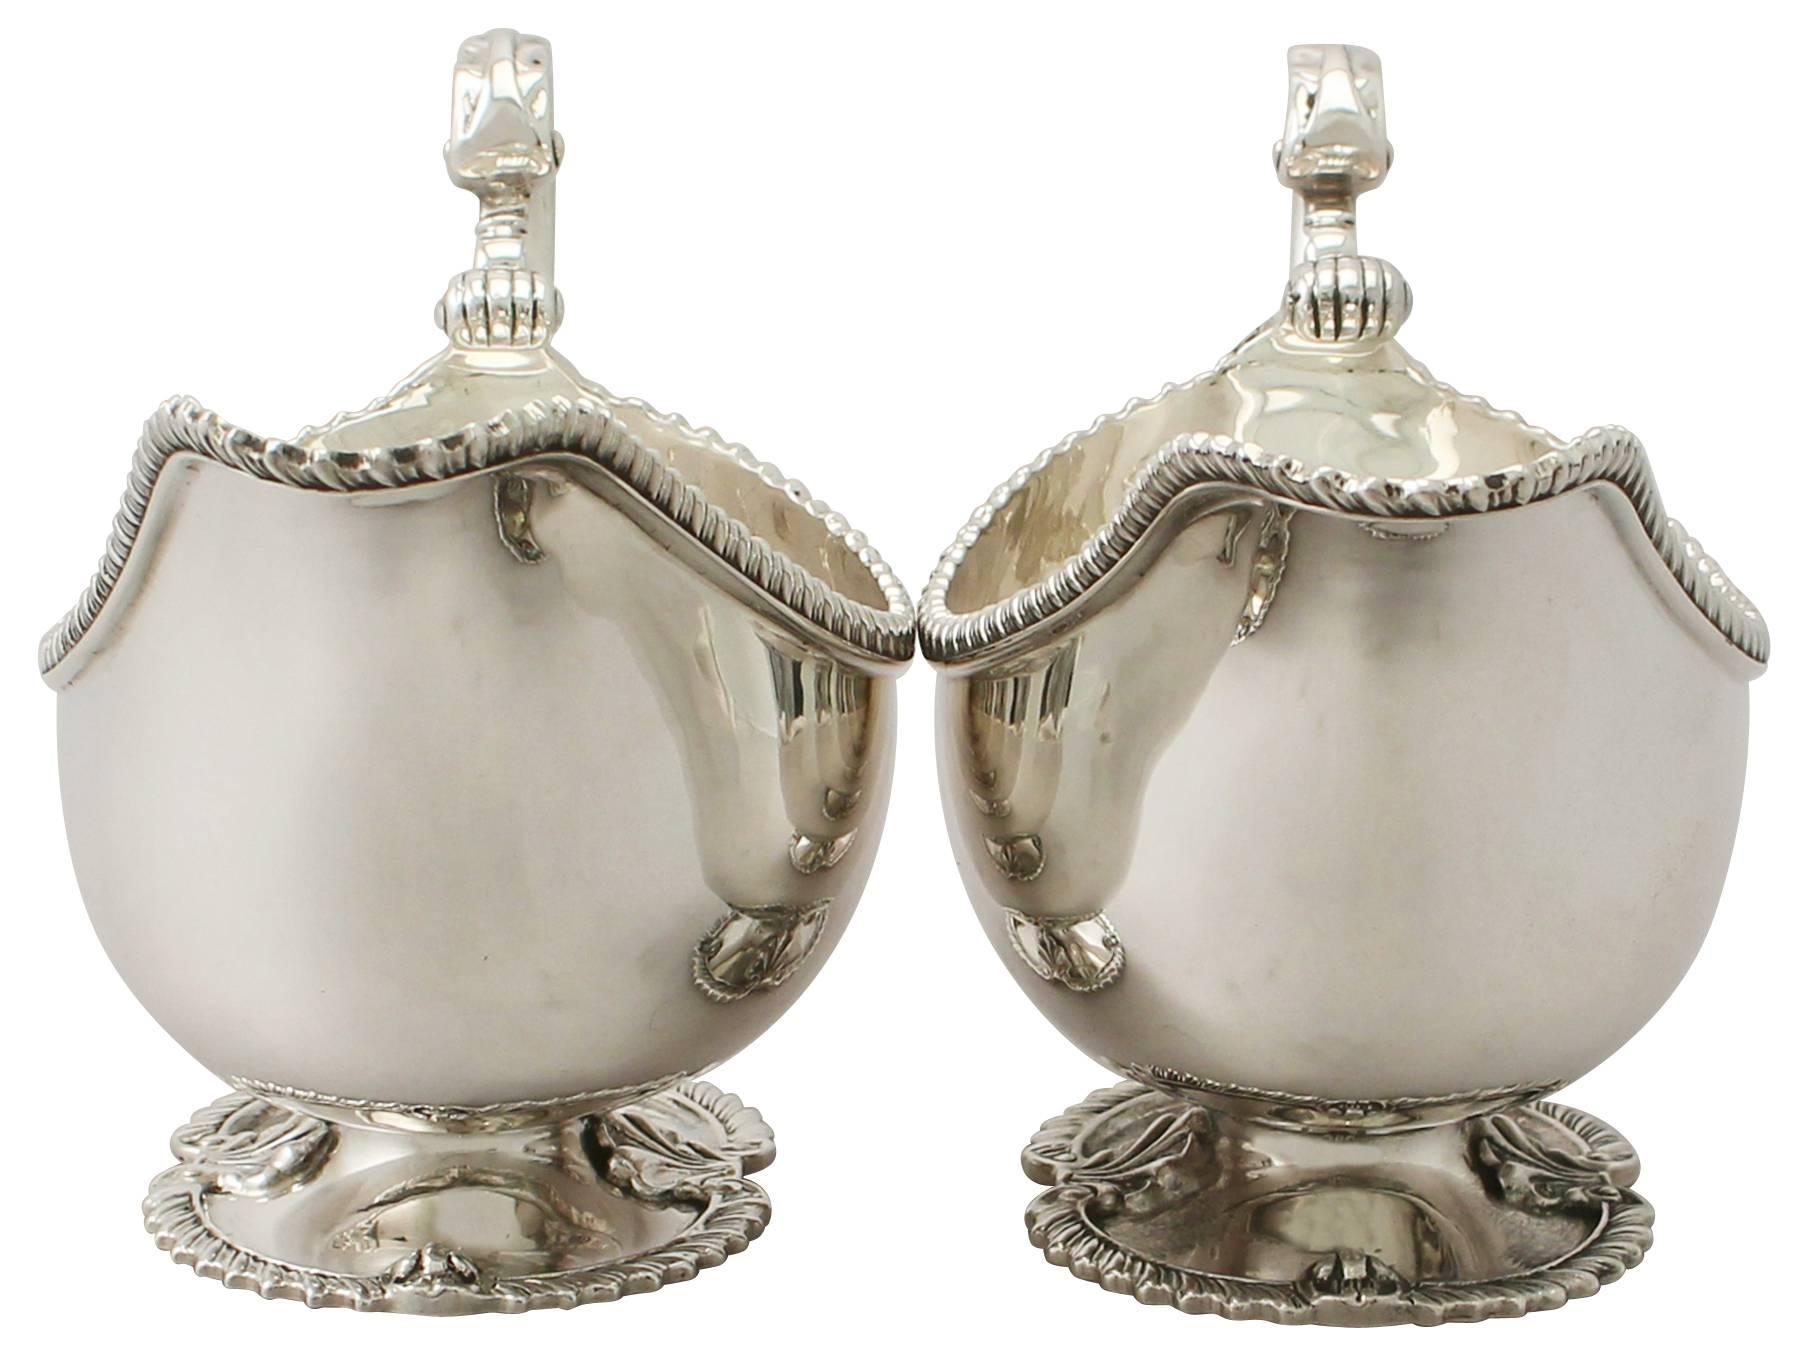 English Antique Sterling Silver Sauceboats or Gravy Boats in Regency Style, George V